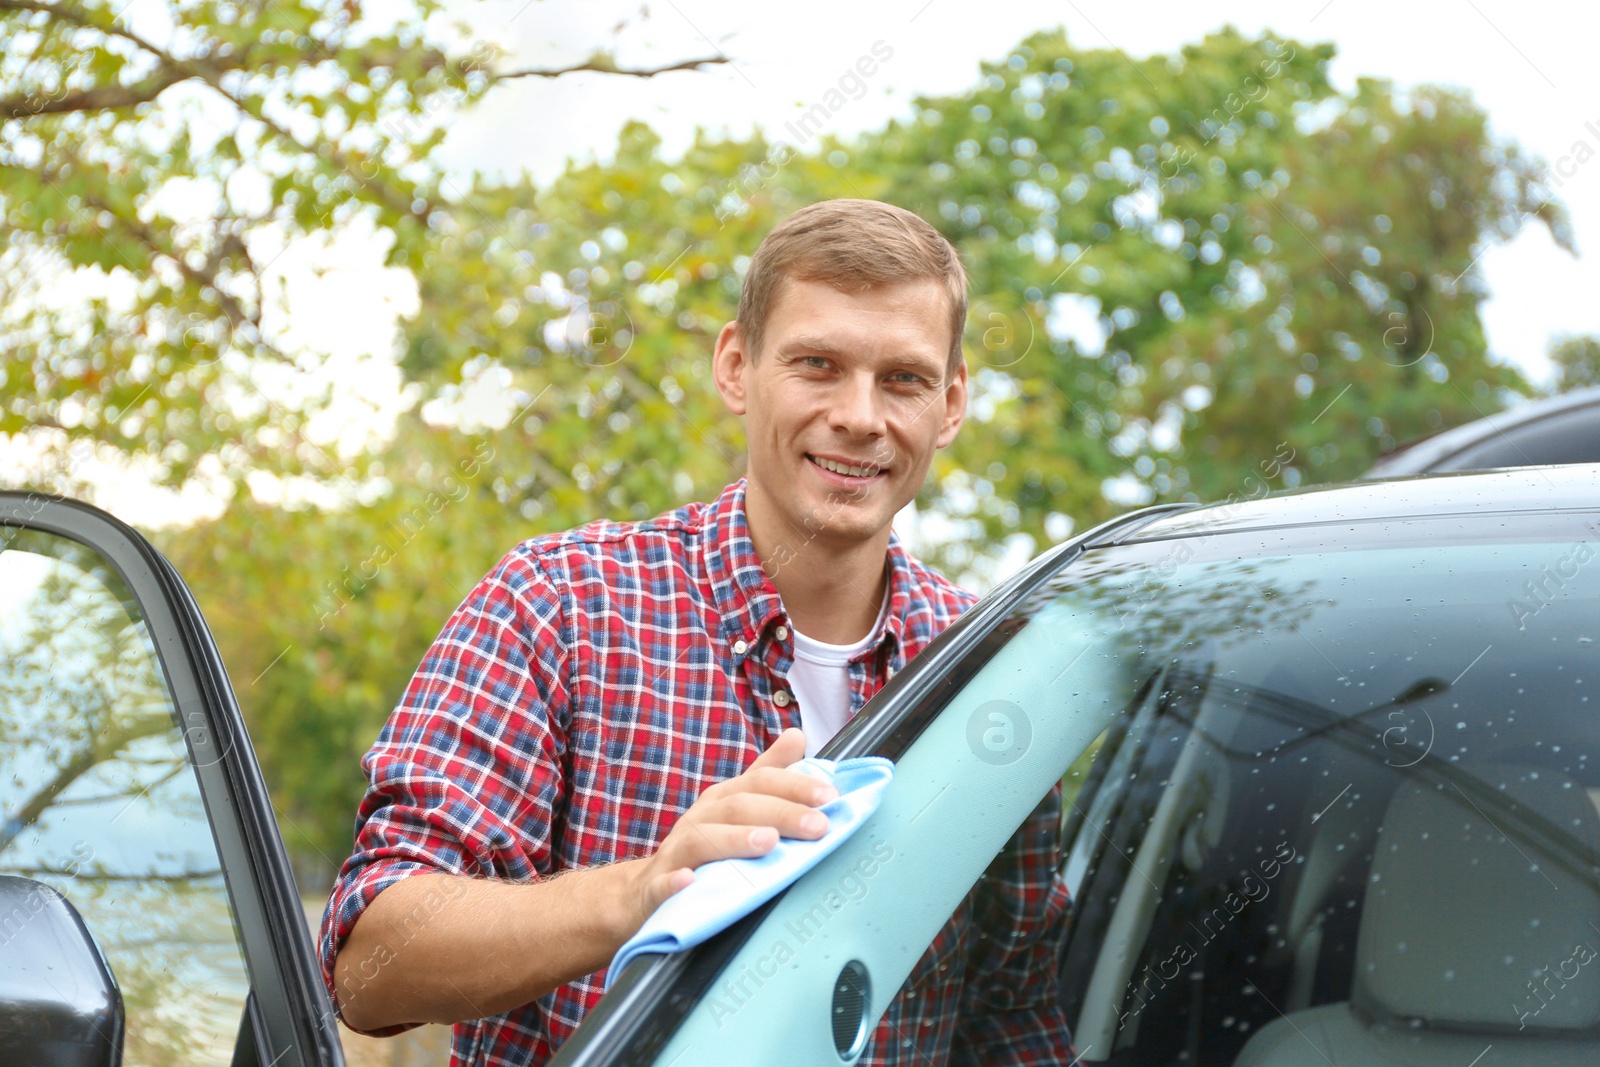 Photo of Man washing car windshield with rag outdoors